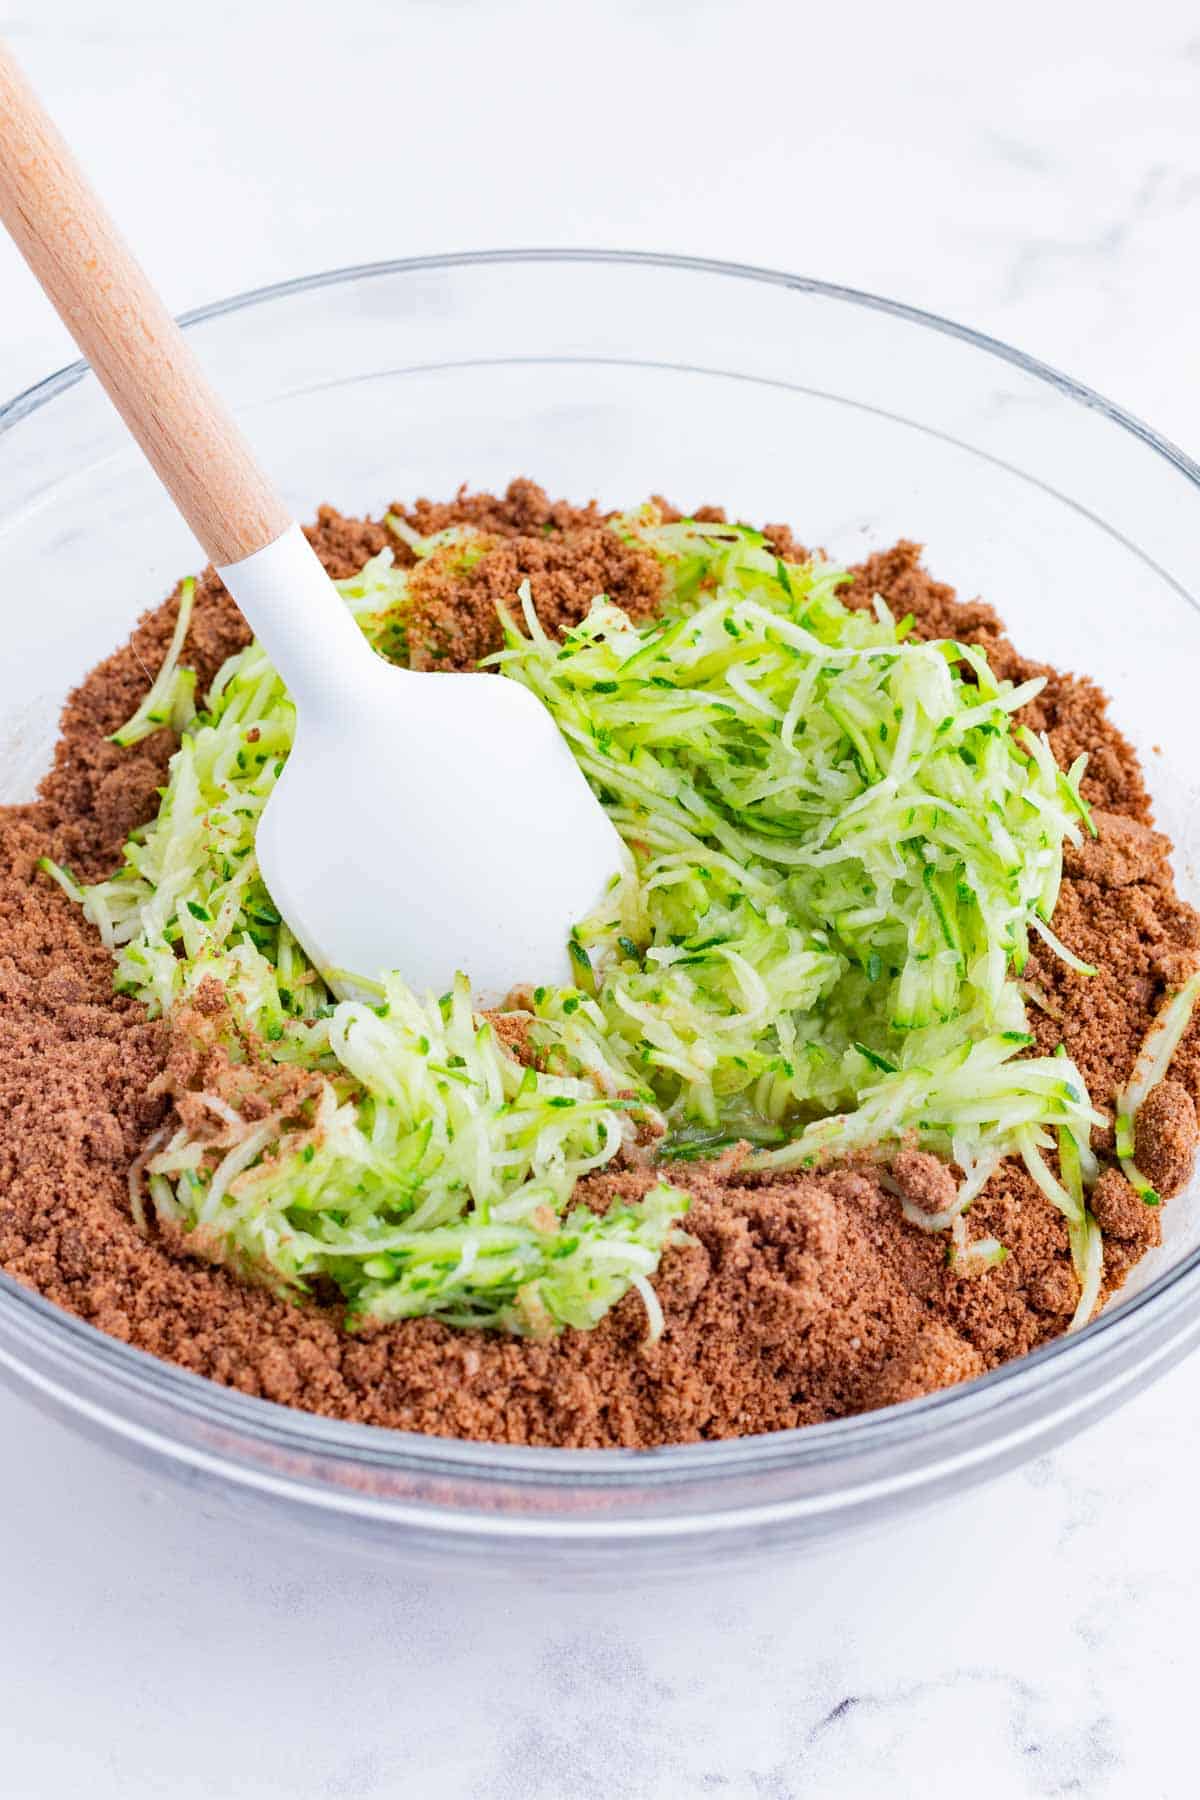 Shredded zucchini and flour is stirred into the brownie batter.